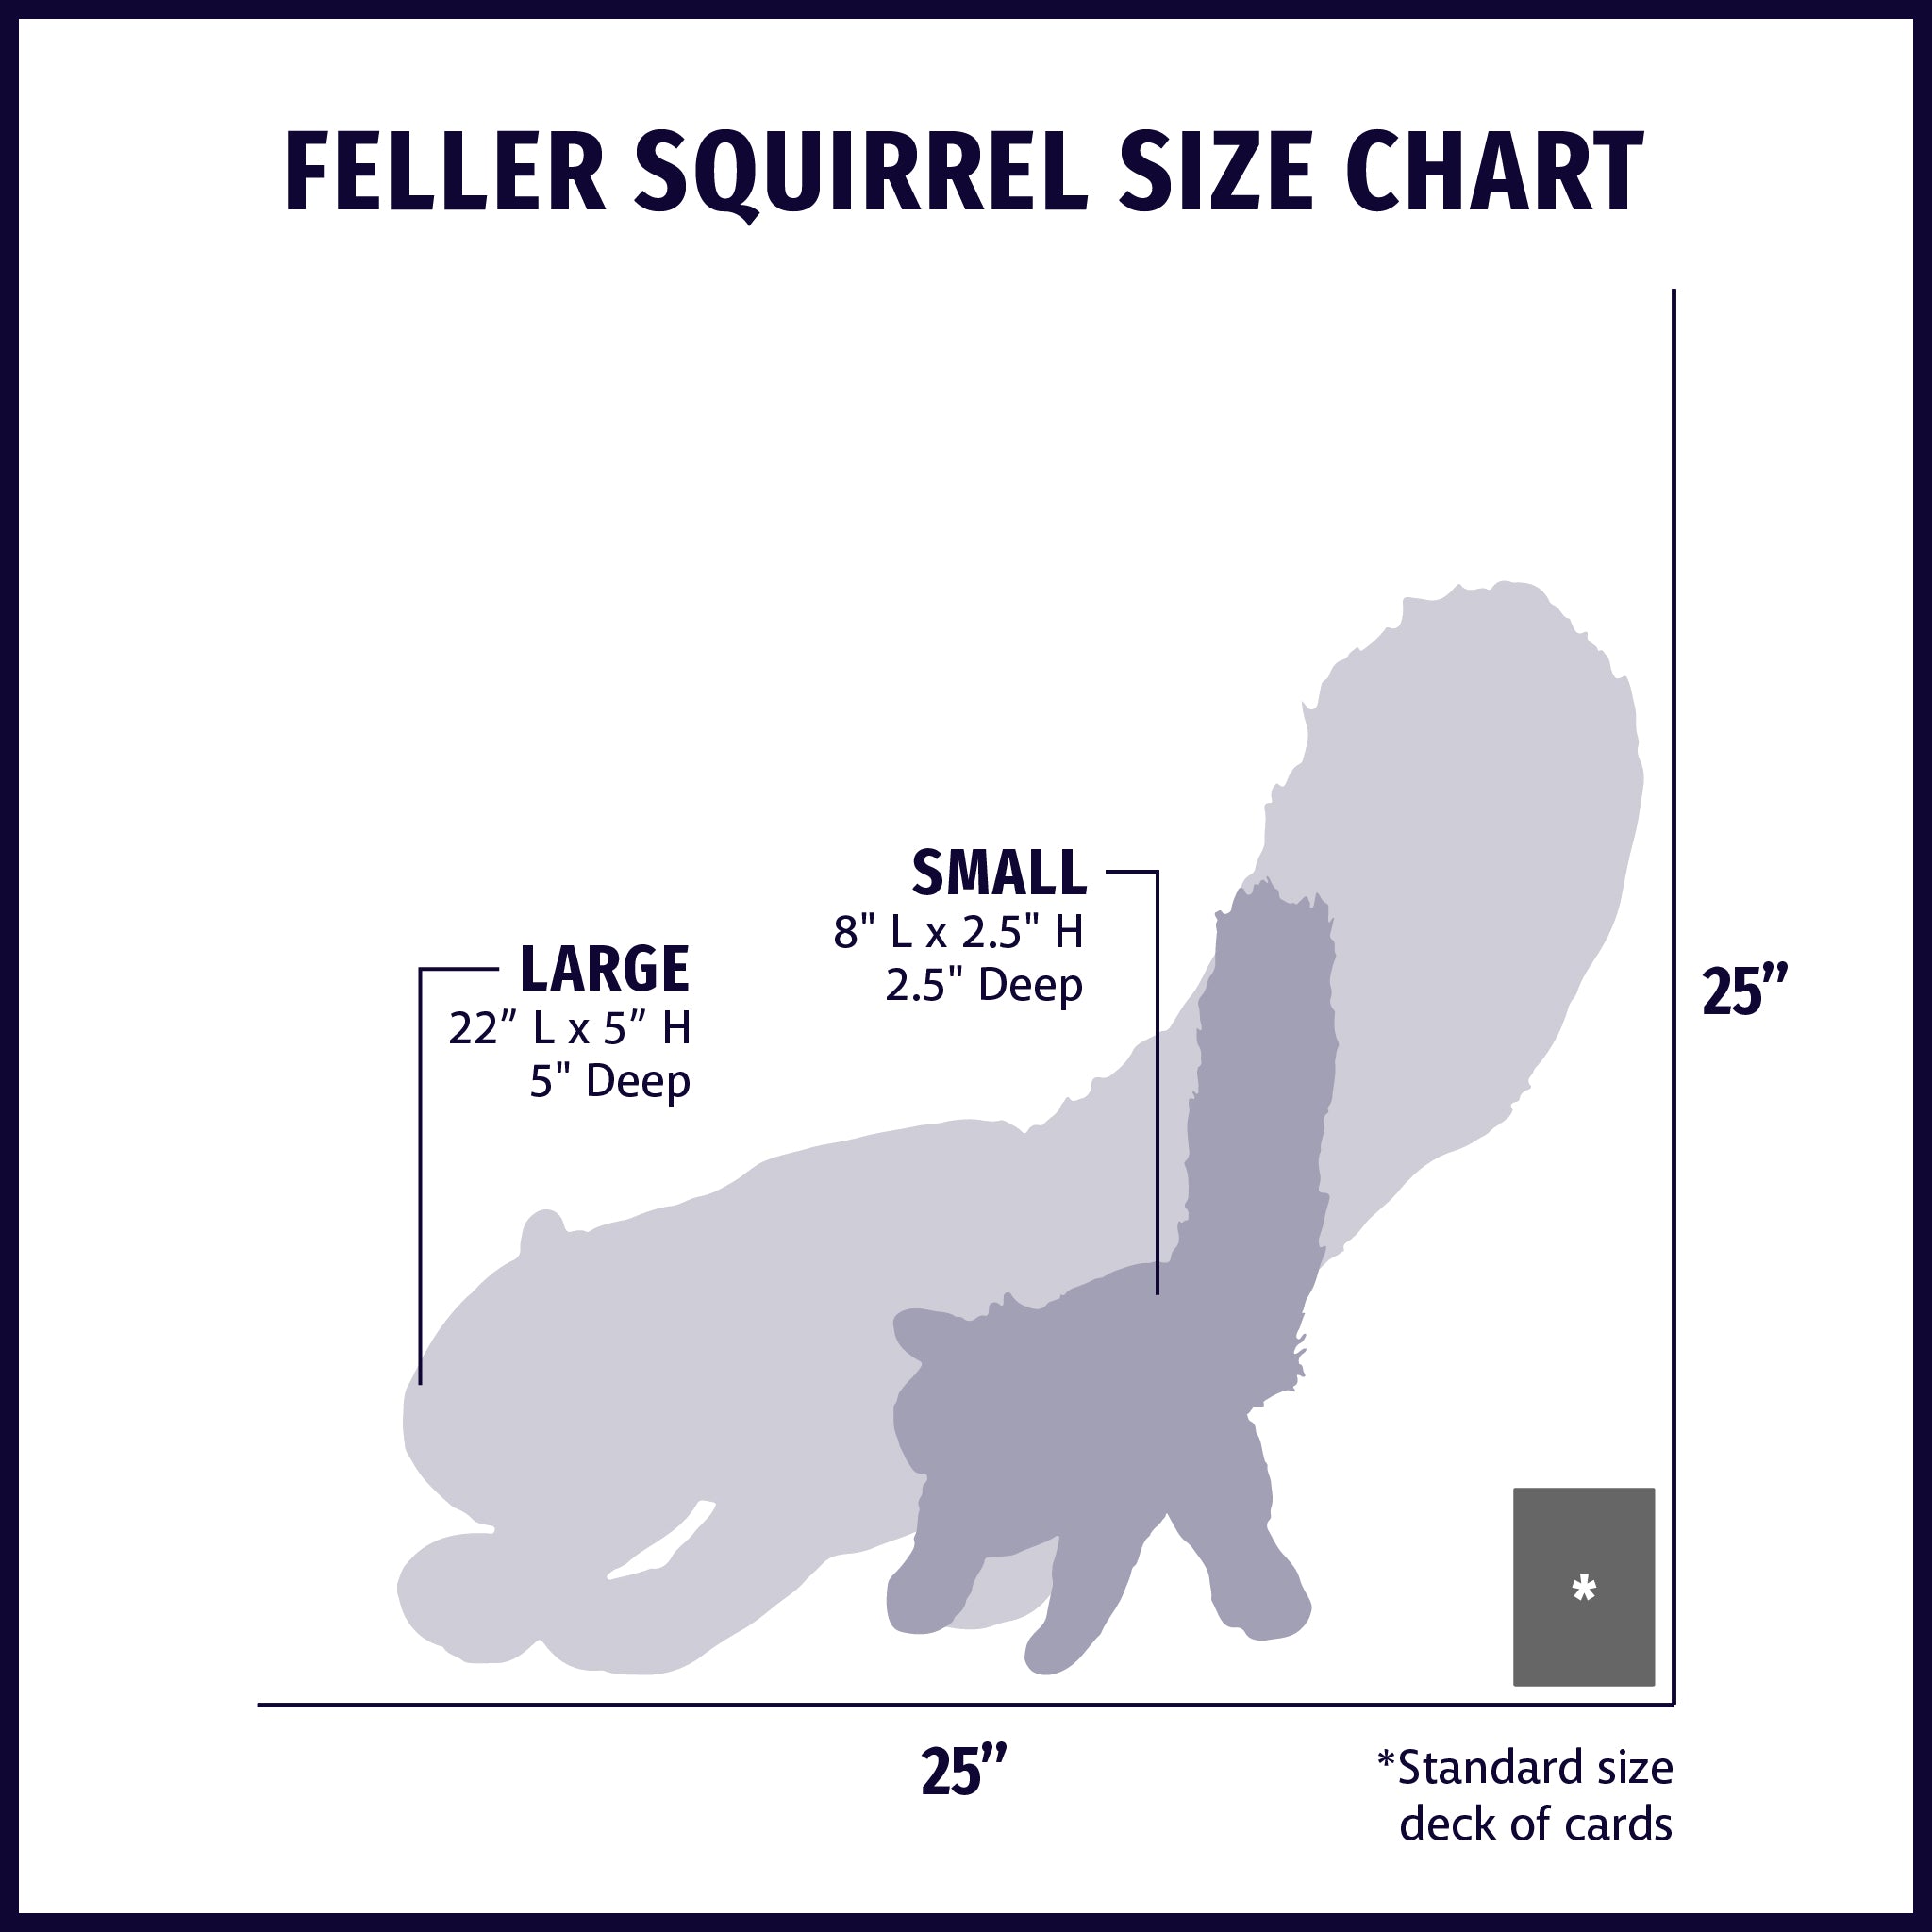 Size chart displaying Feller Squirrel plush dog toys silhouettes in small and large with approximate dimensions of each size compared to standard size deck of cards.